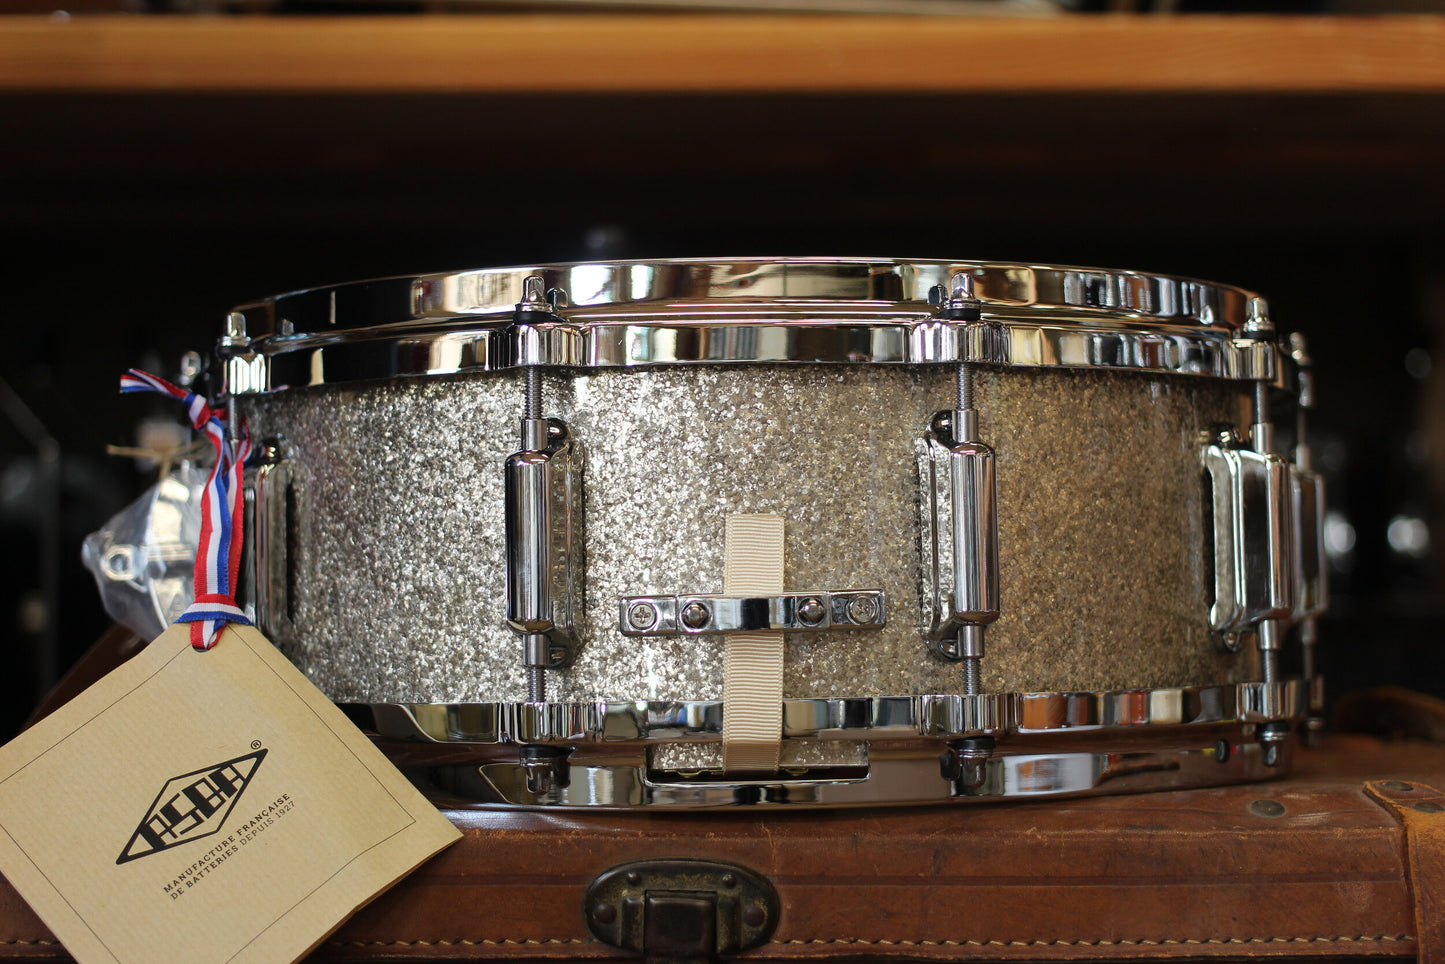 ASBA Drums 'Revelation' Snare Drum 5"x14" in Marcel Blanche Sparkle